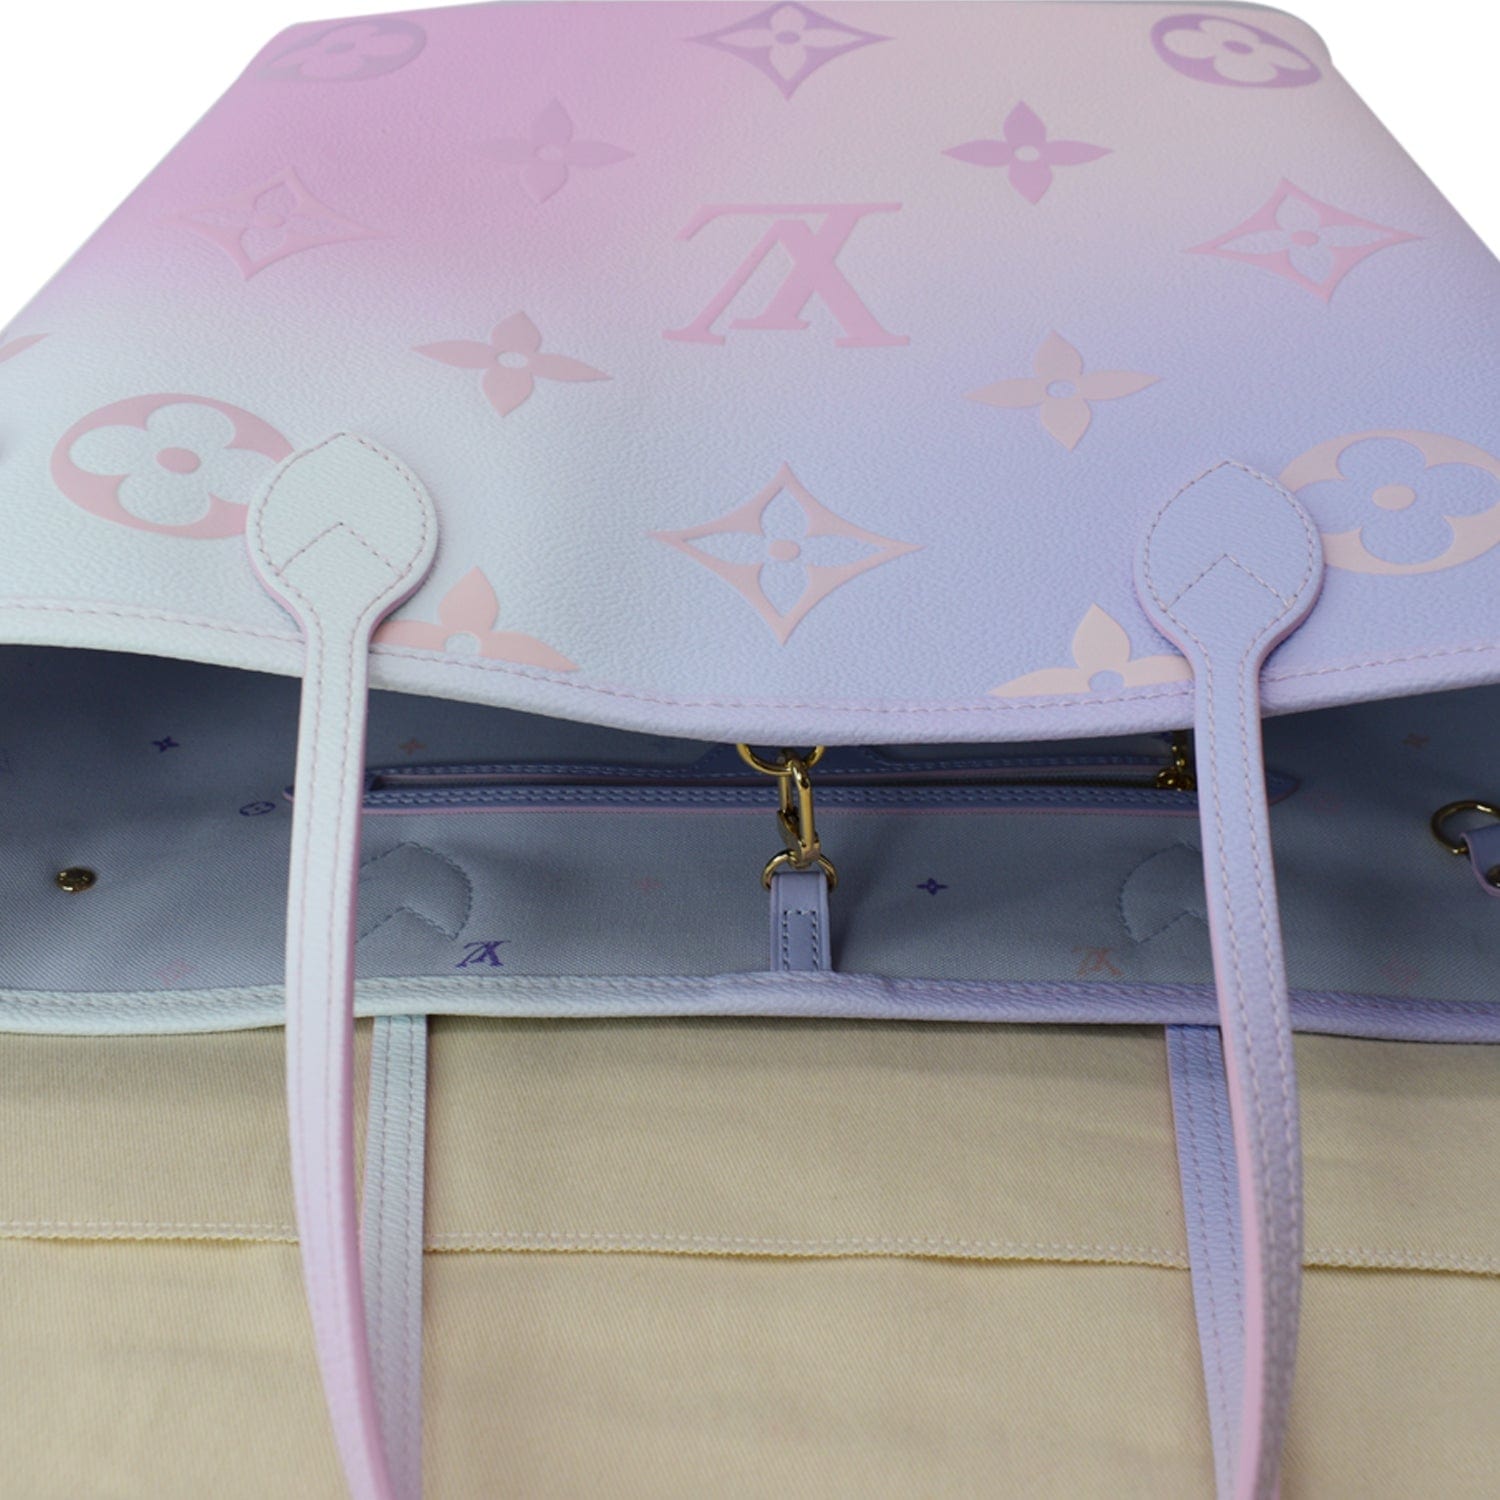 Louis Vuitton Pastel Neverfull - For Sale on 1stDibs  lv pastel bag, louis  vuitton neverfull pastel, louis vuitton pastel bag